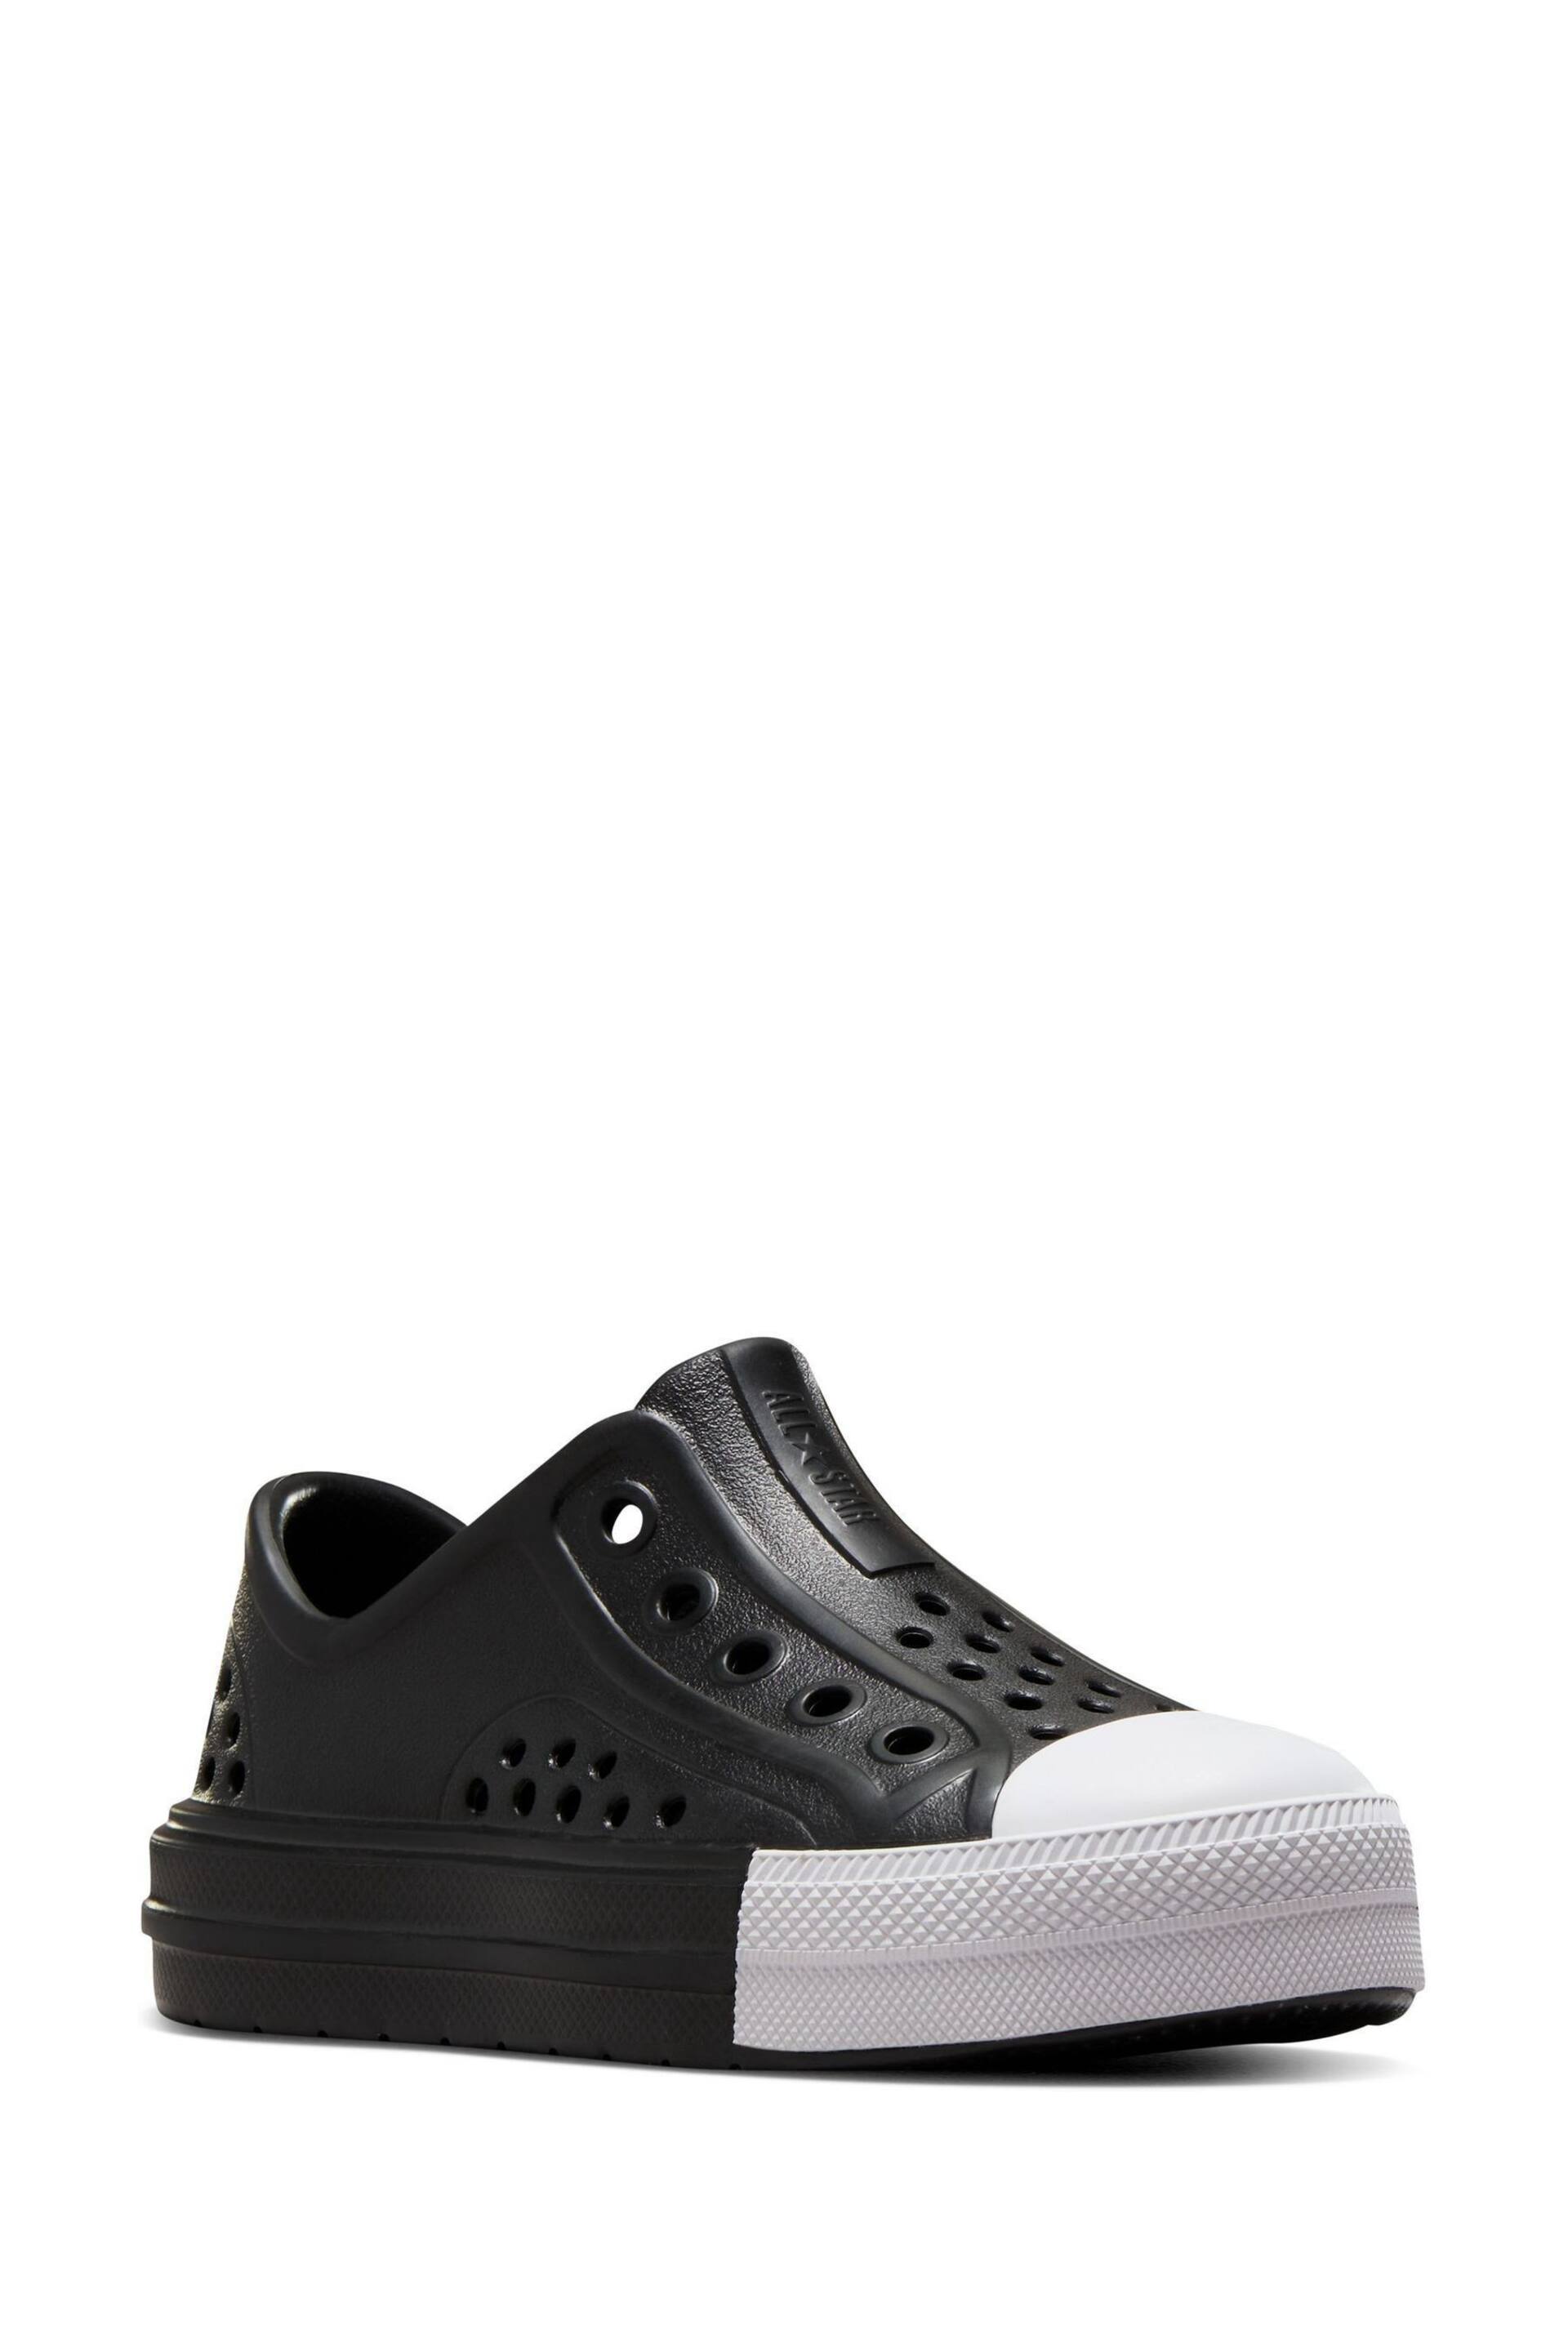 Converse Black Chuck Taylor All Star Play Lite Cx Sandals - Image 3 of 9